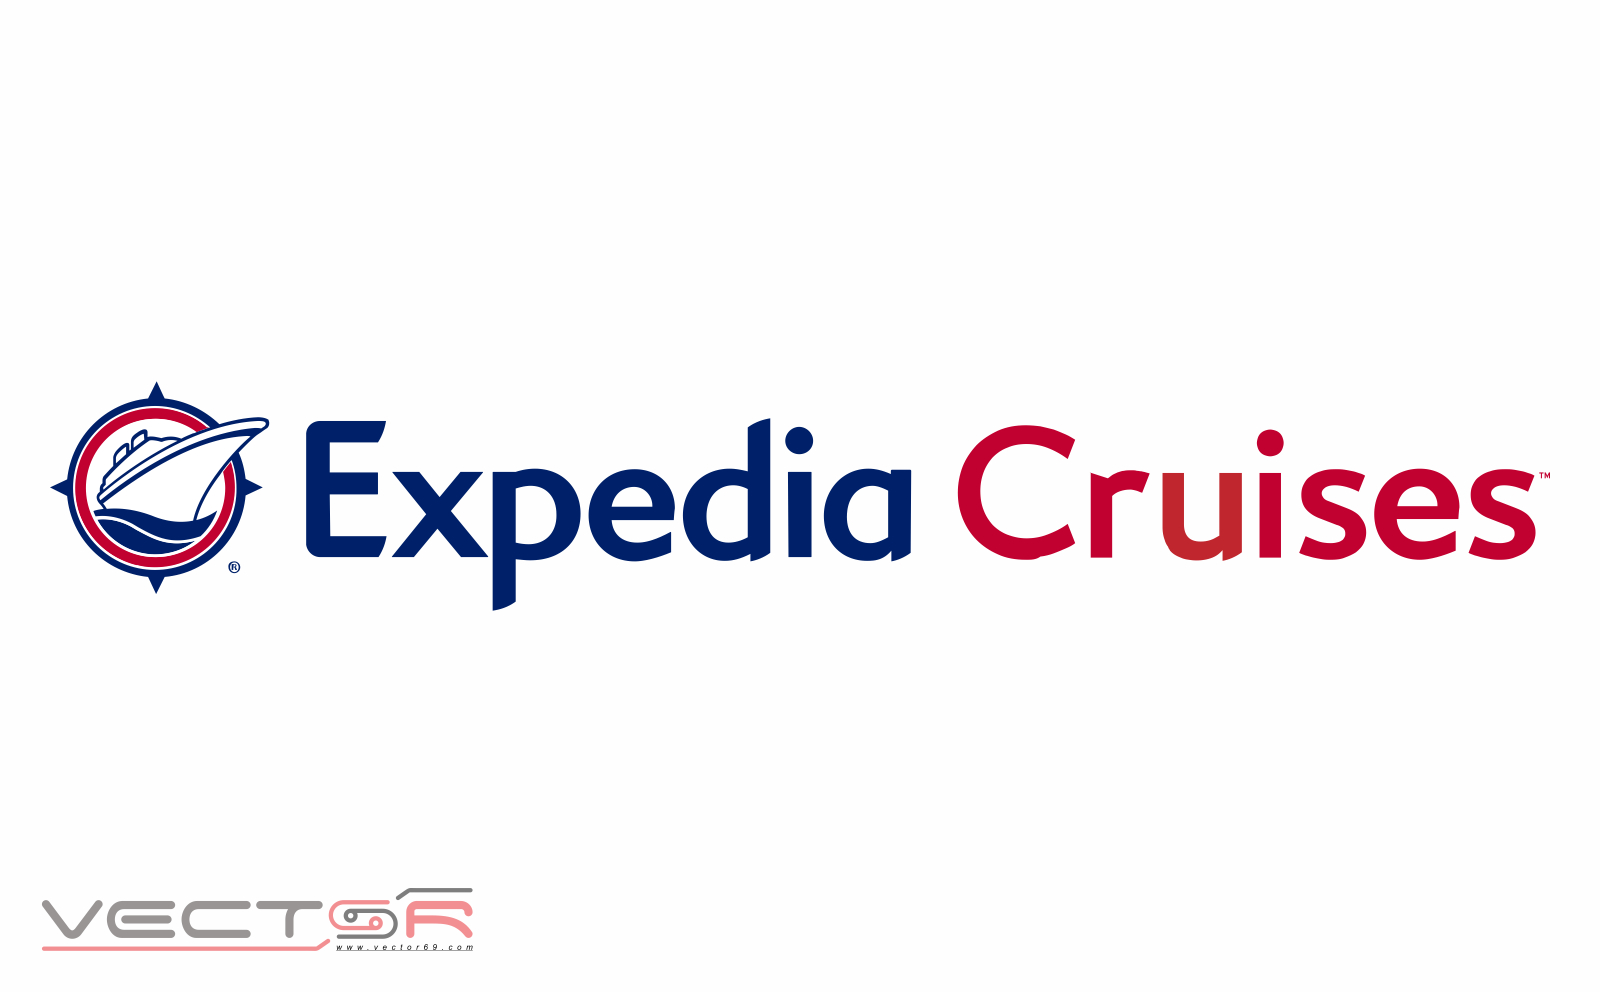 Expedia Cruises Logo - Download Transparent Images, Portable Network Graphics (.PNG)